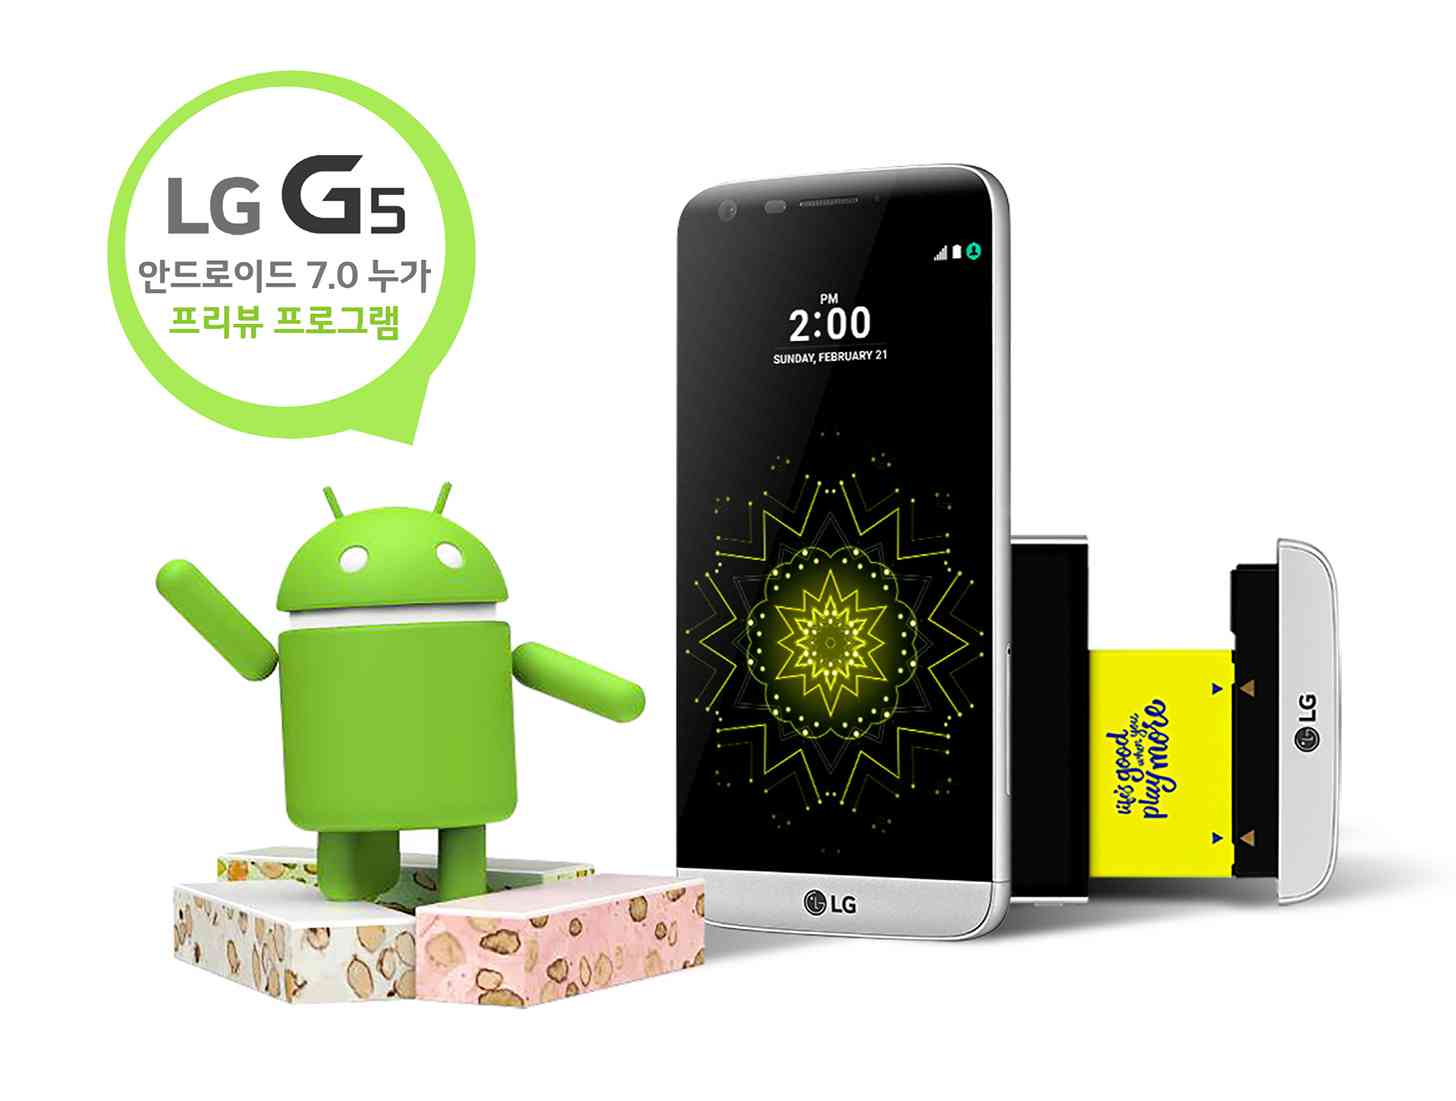 LG G5 Android 7.0 Nougat Preview Program